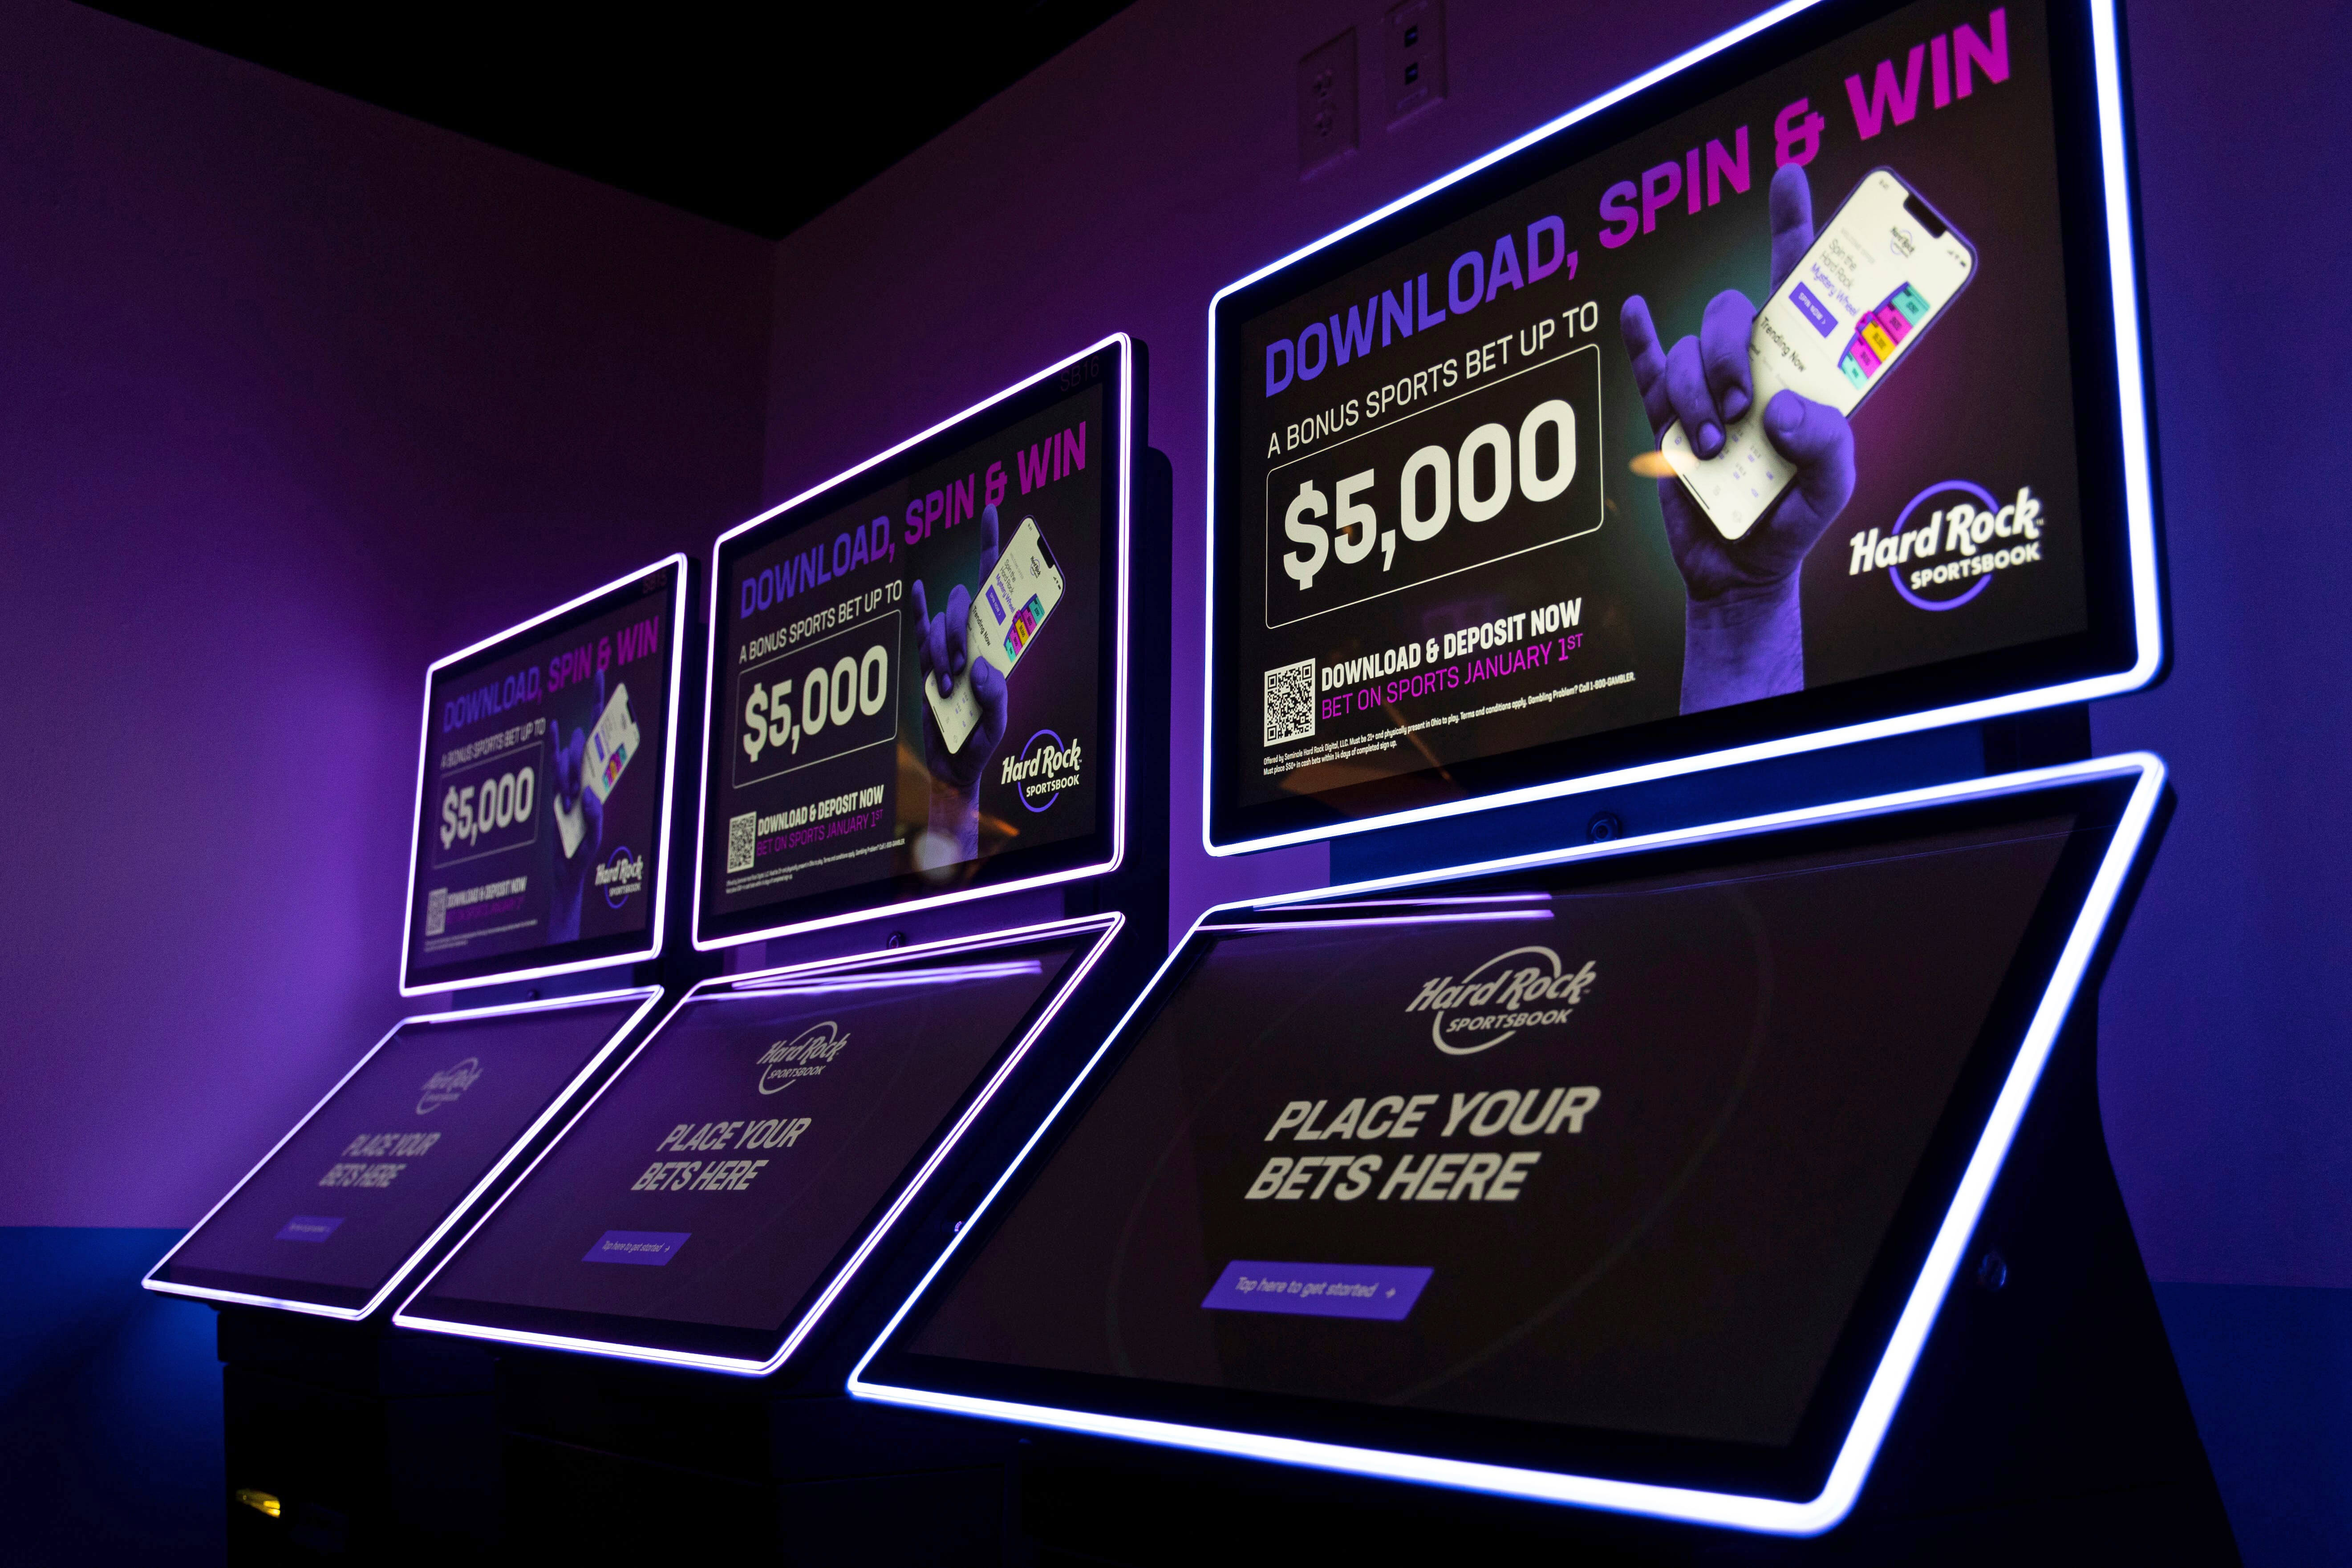 How To Bet - Hard Rock Bet Goes Live with SGP Max Feature